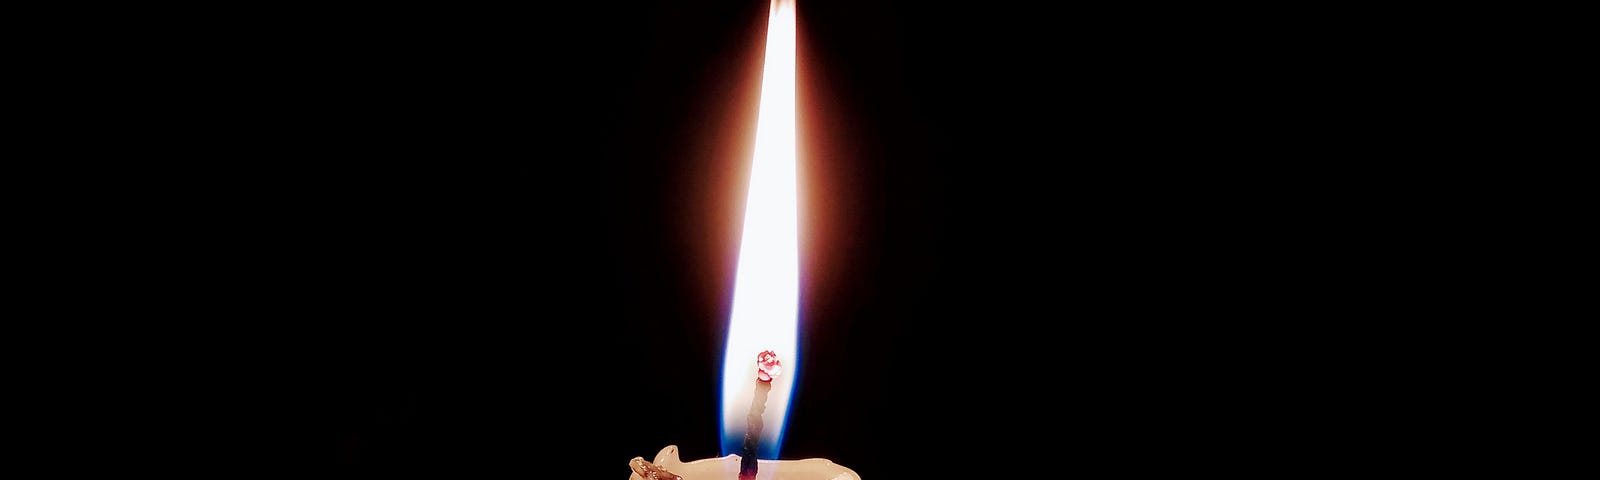 A candle burning against a dark background.